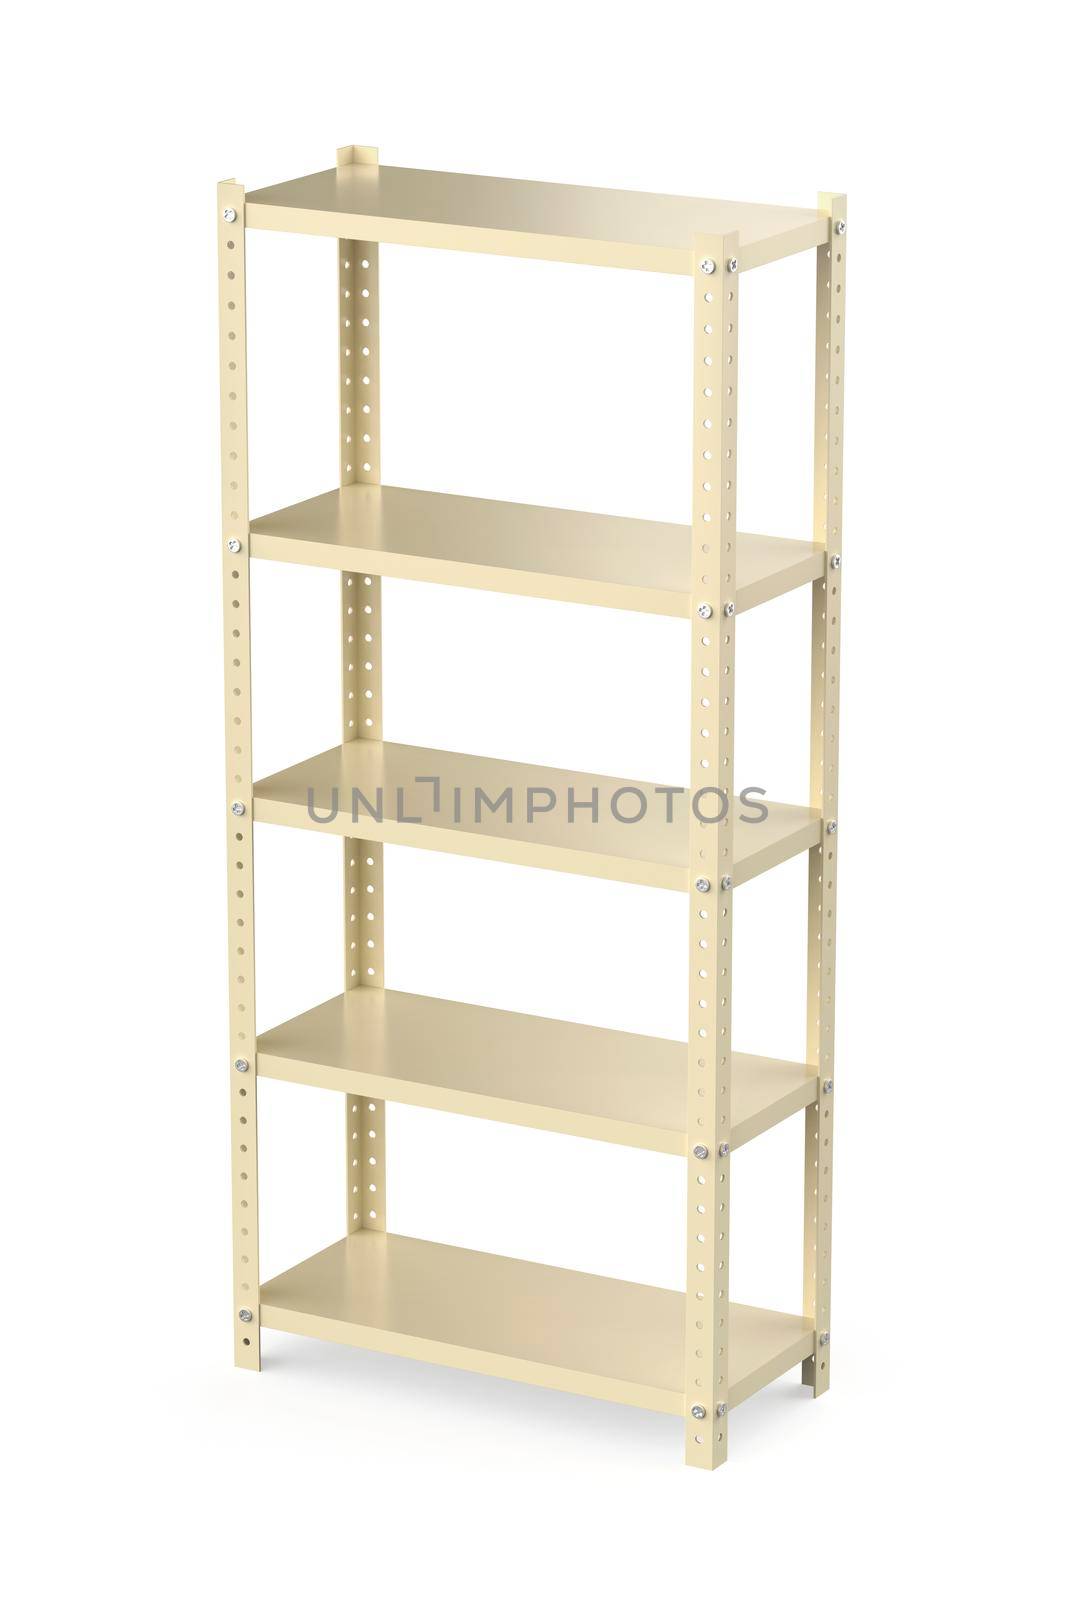 Metal shelving unit by magraphics